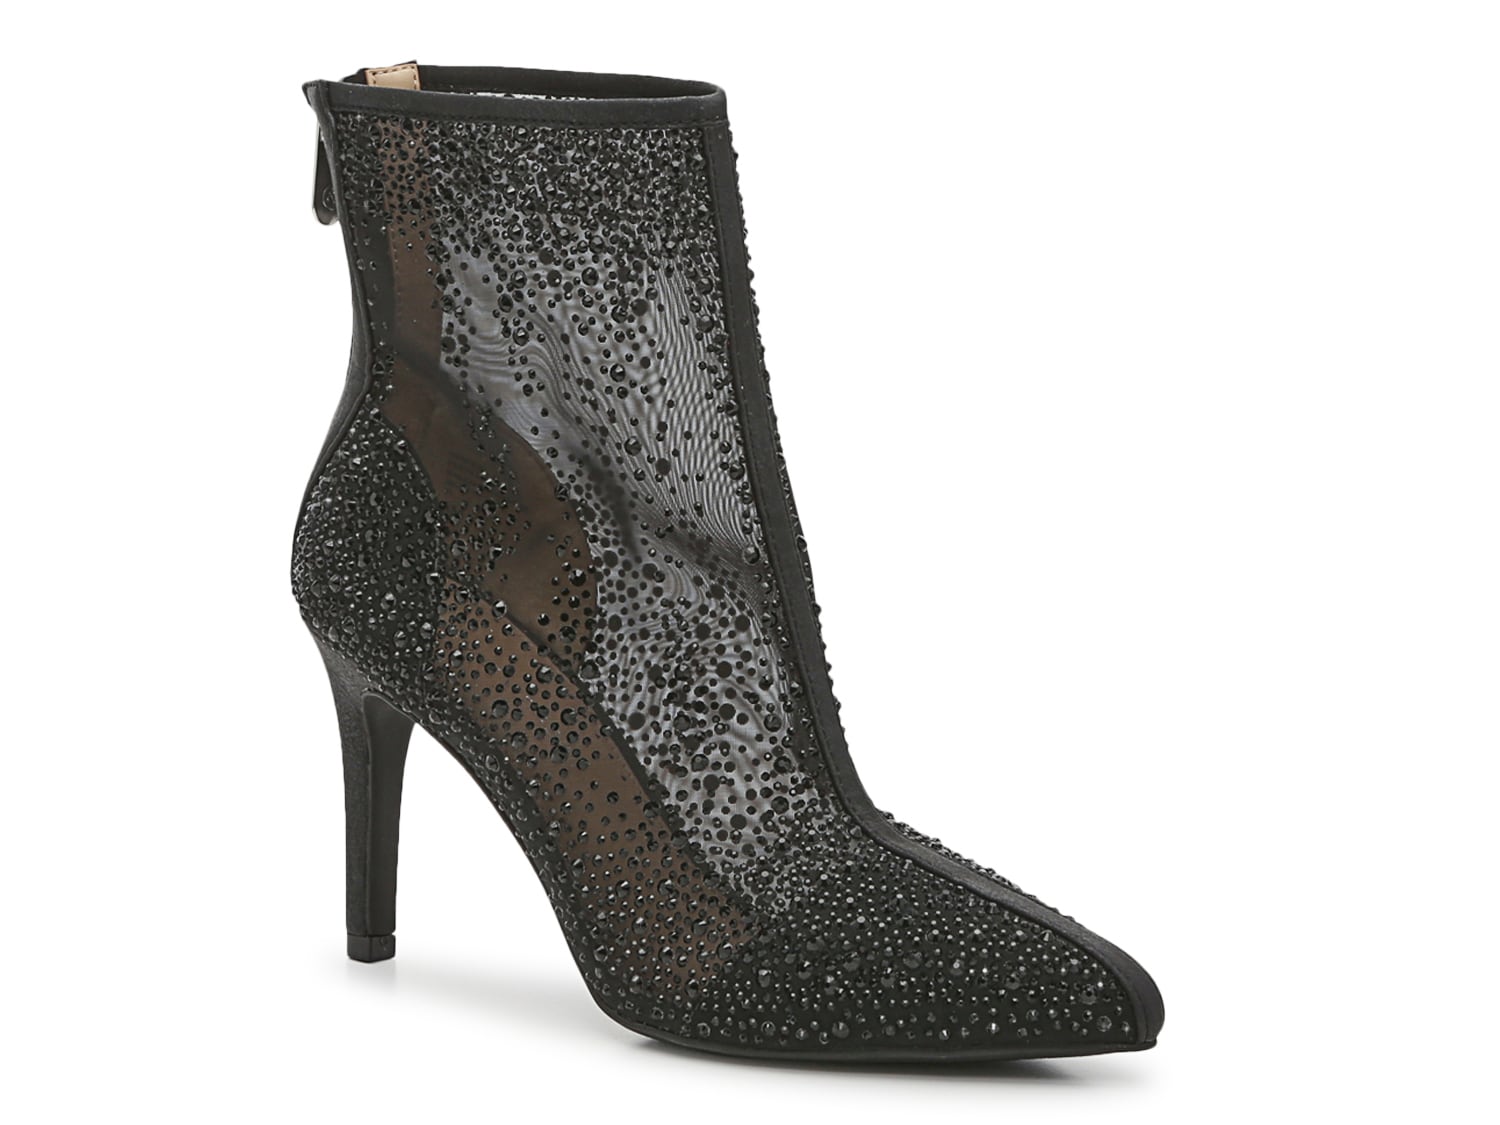 Adrienne Vittadini Noon Boot - Free Shipping | DSW